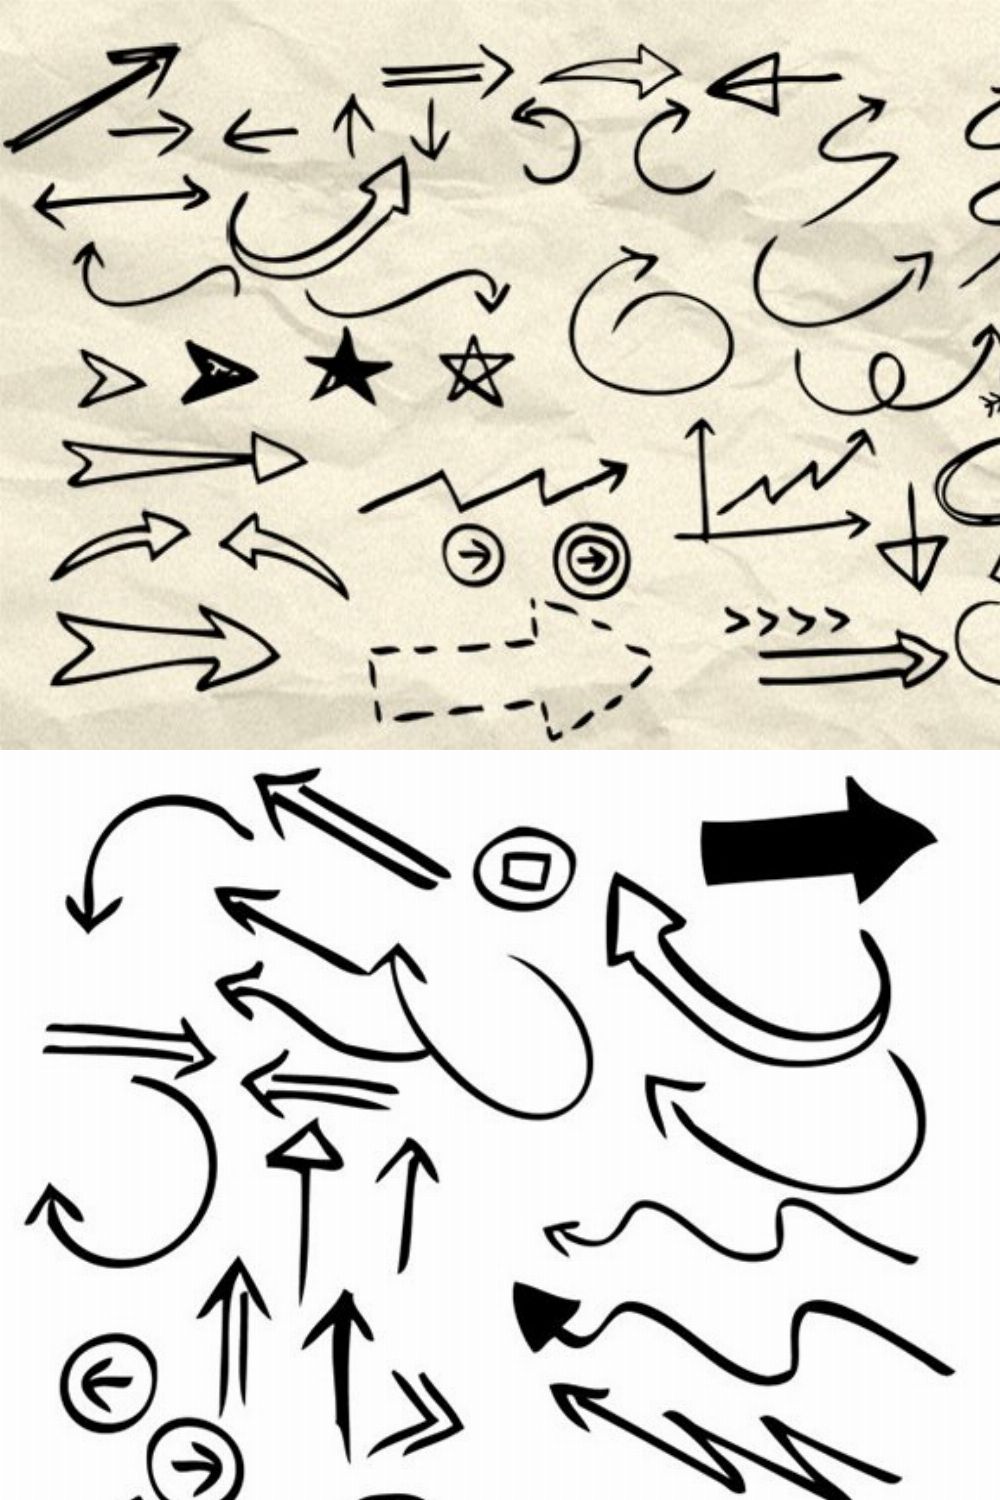 90 Hand Drawn Arrow & Symbol Brushes pinterest preview image.